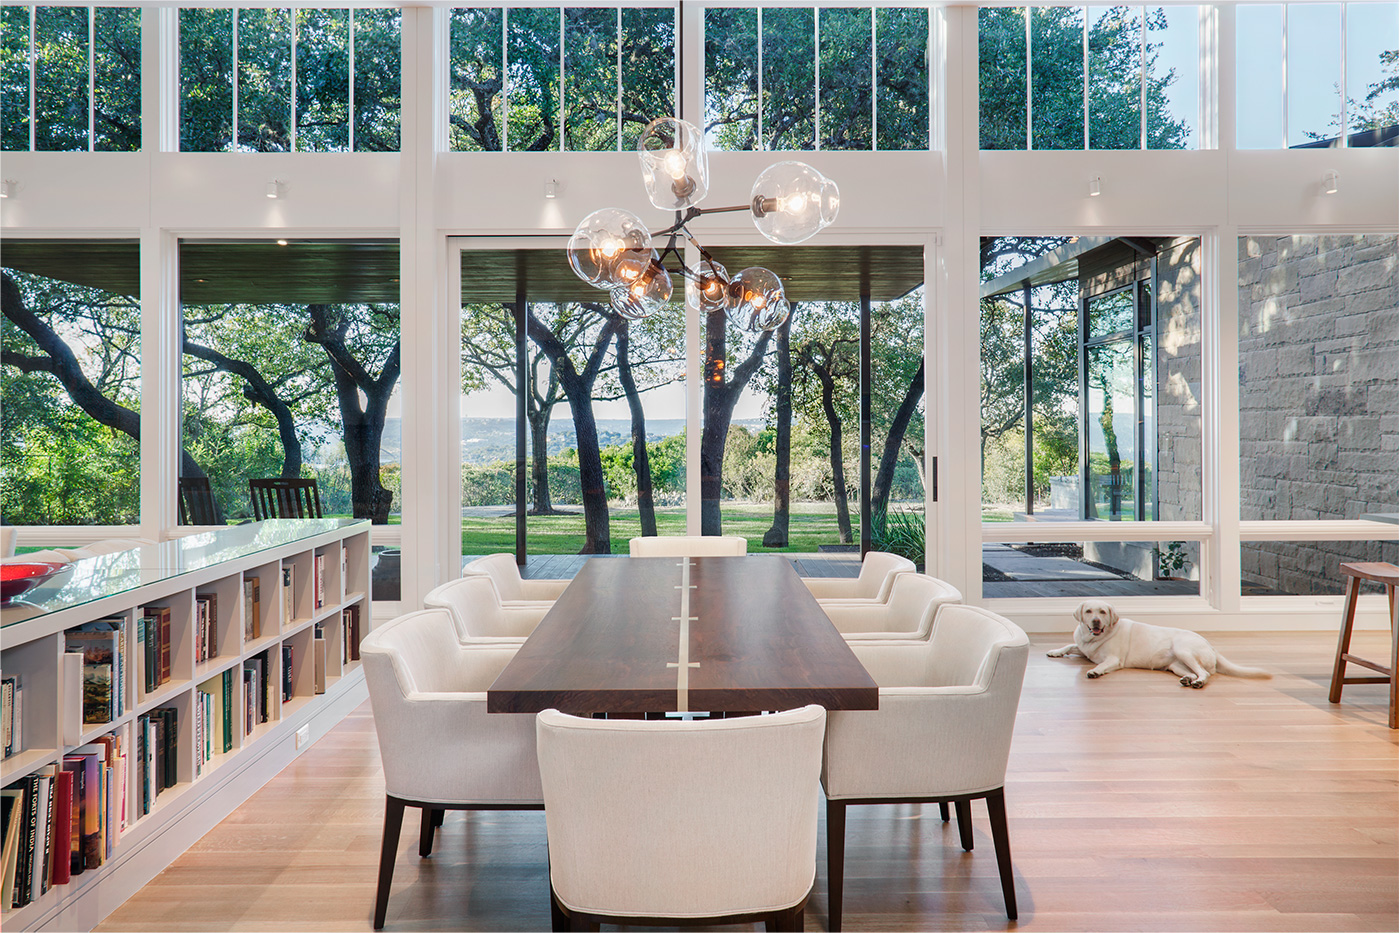 a central dining table Infront of large windows that look out to a view.